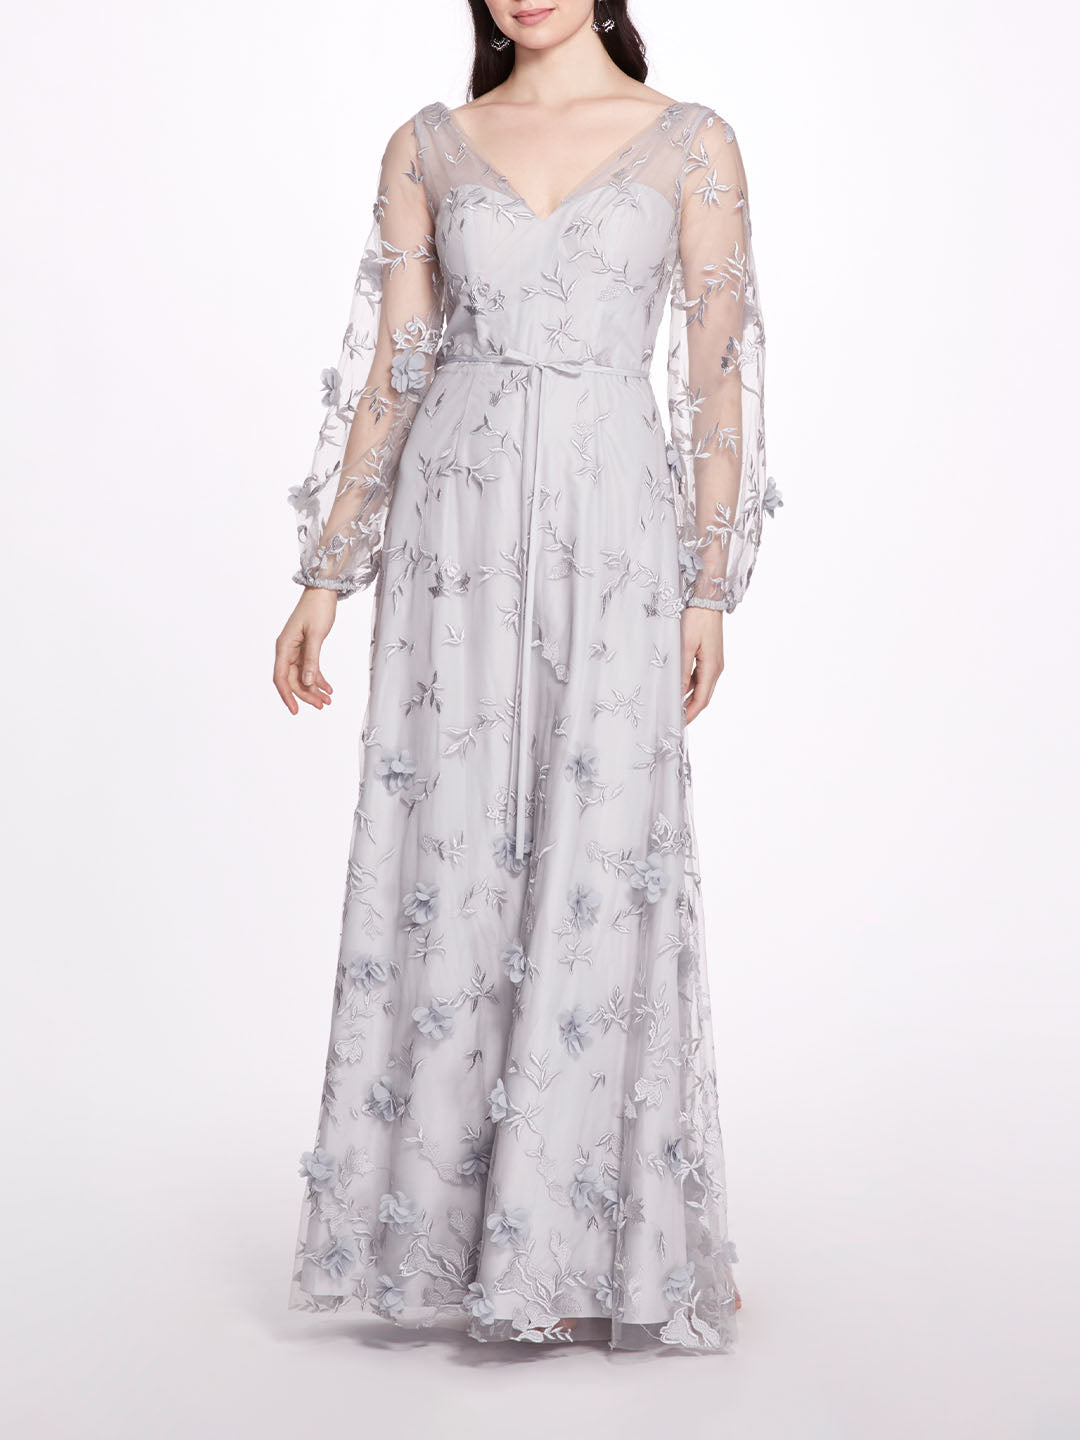 Dove Grey Floral Embellished Gown with Sheer Balloon Sleeves – Marchesa